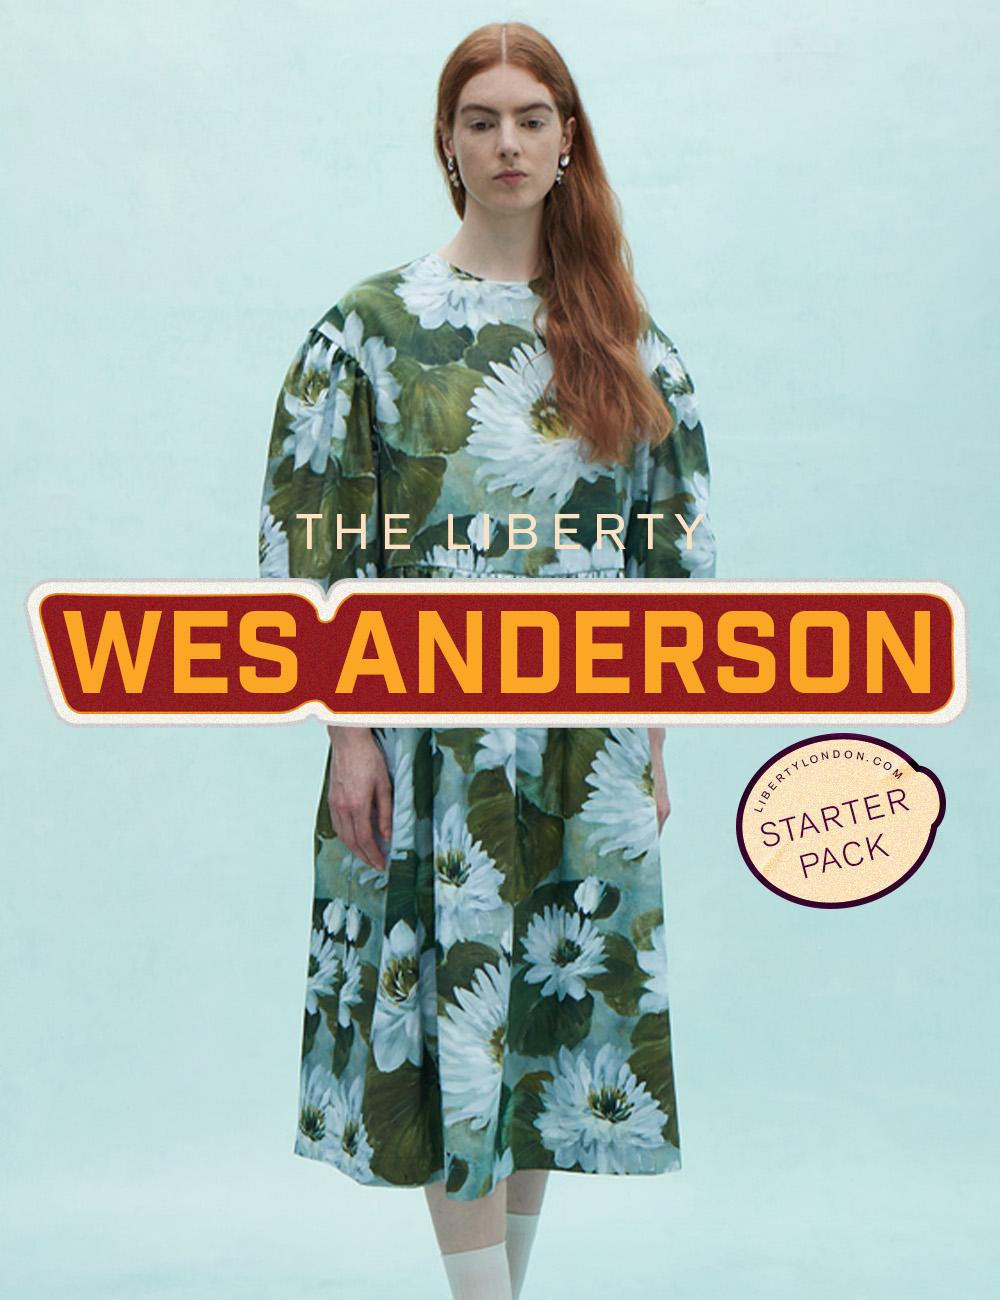 The Best Wes Anderson Outfits to Wear this Summer